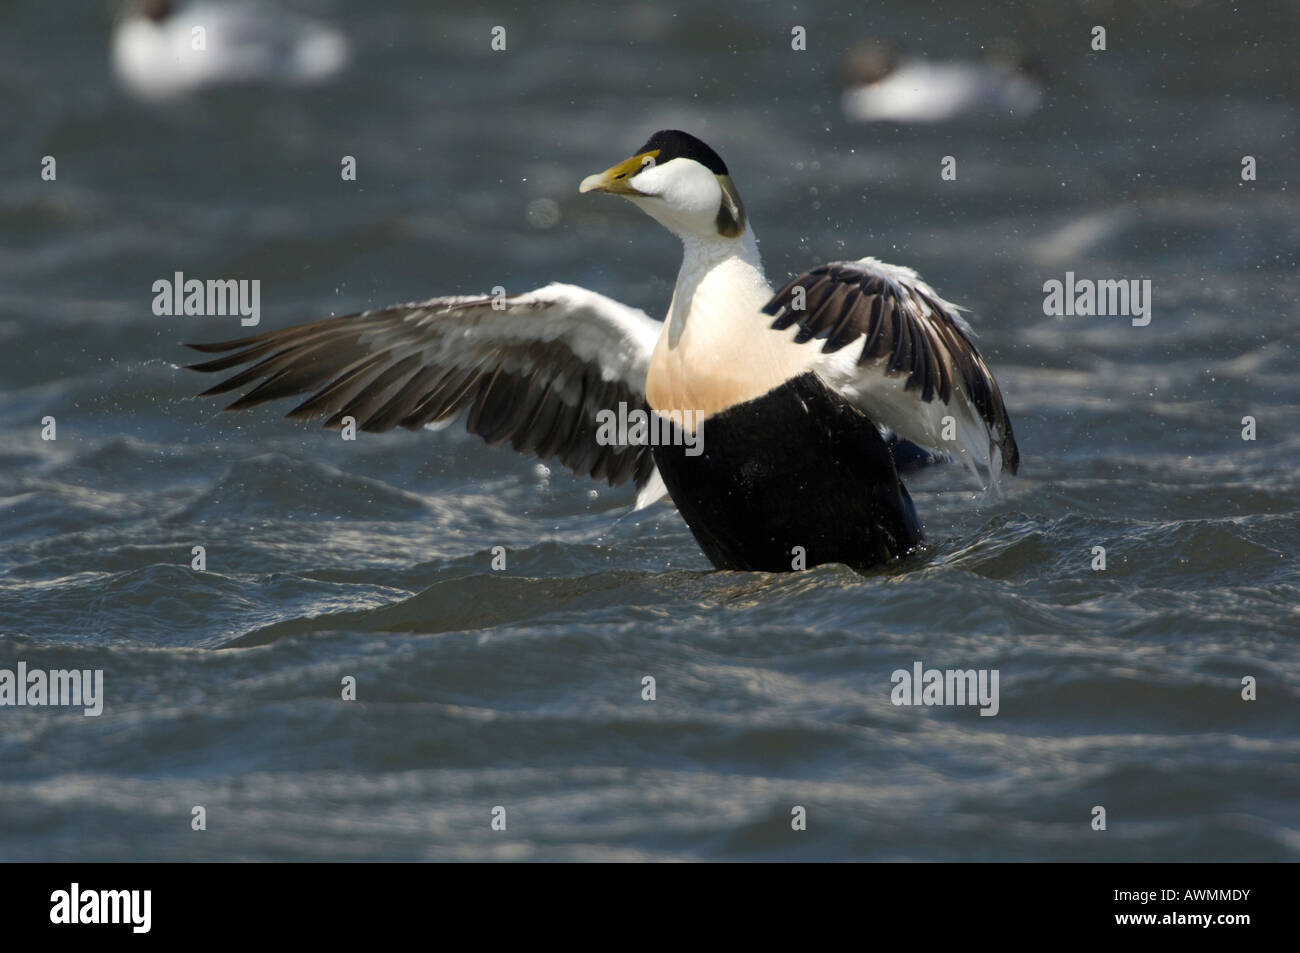 Common Eider (Somateria mollissima) with its wings spread, in the sea, Texel, Netherlands, Europe Stock Photo